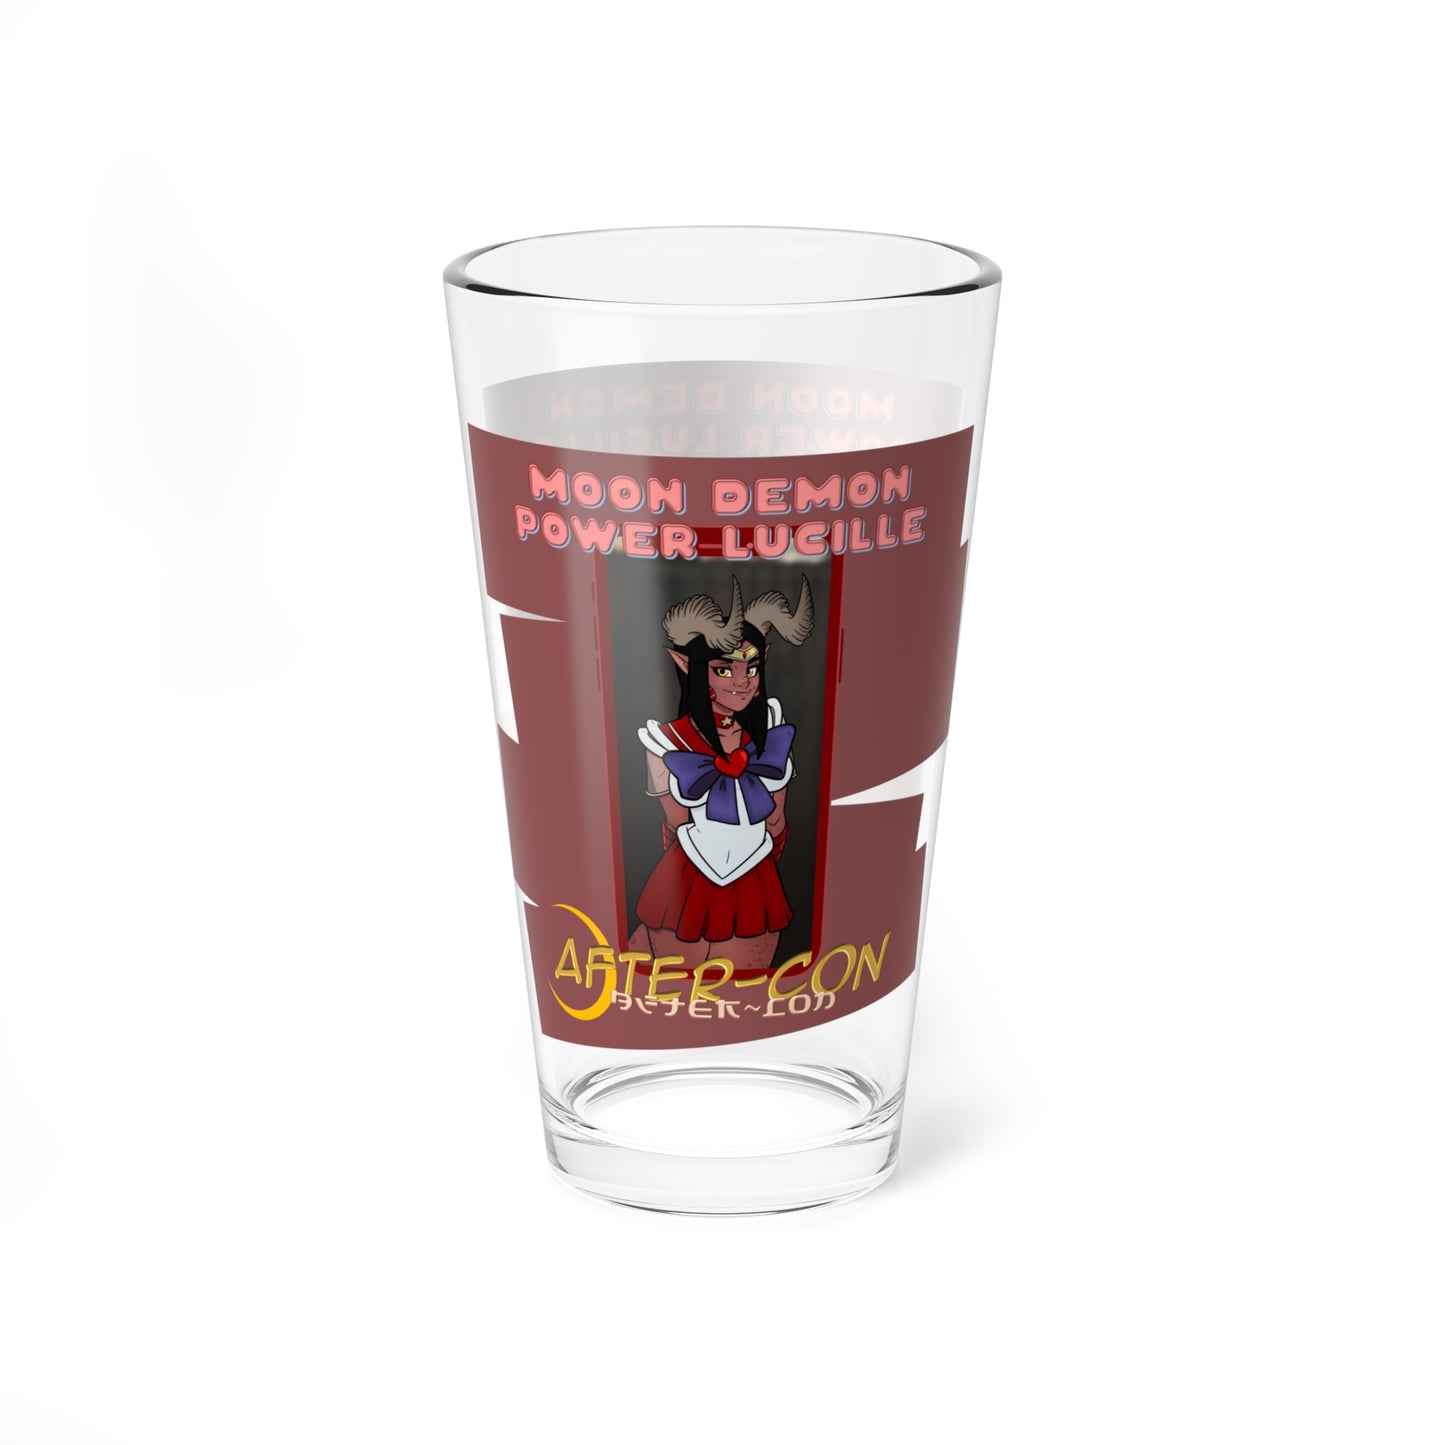 After-con "Moon Demon Power Lucille" Pint Glass, 16oz